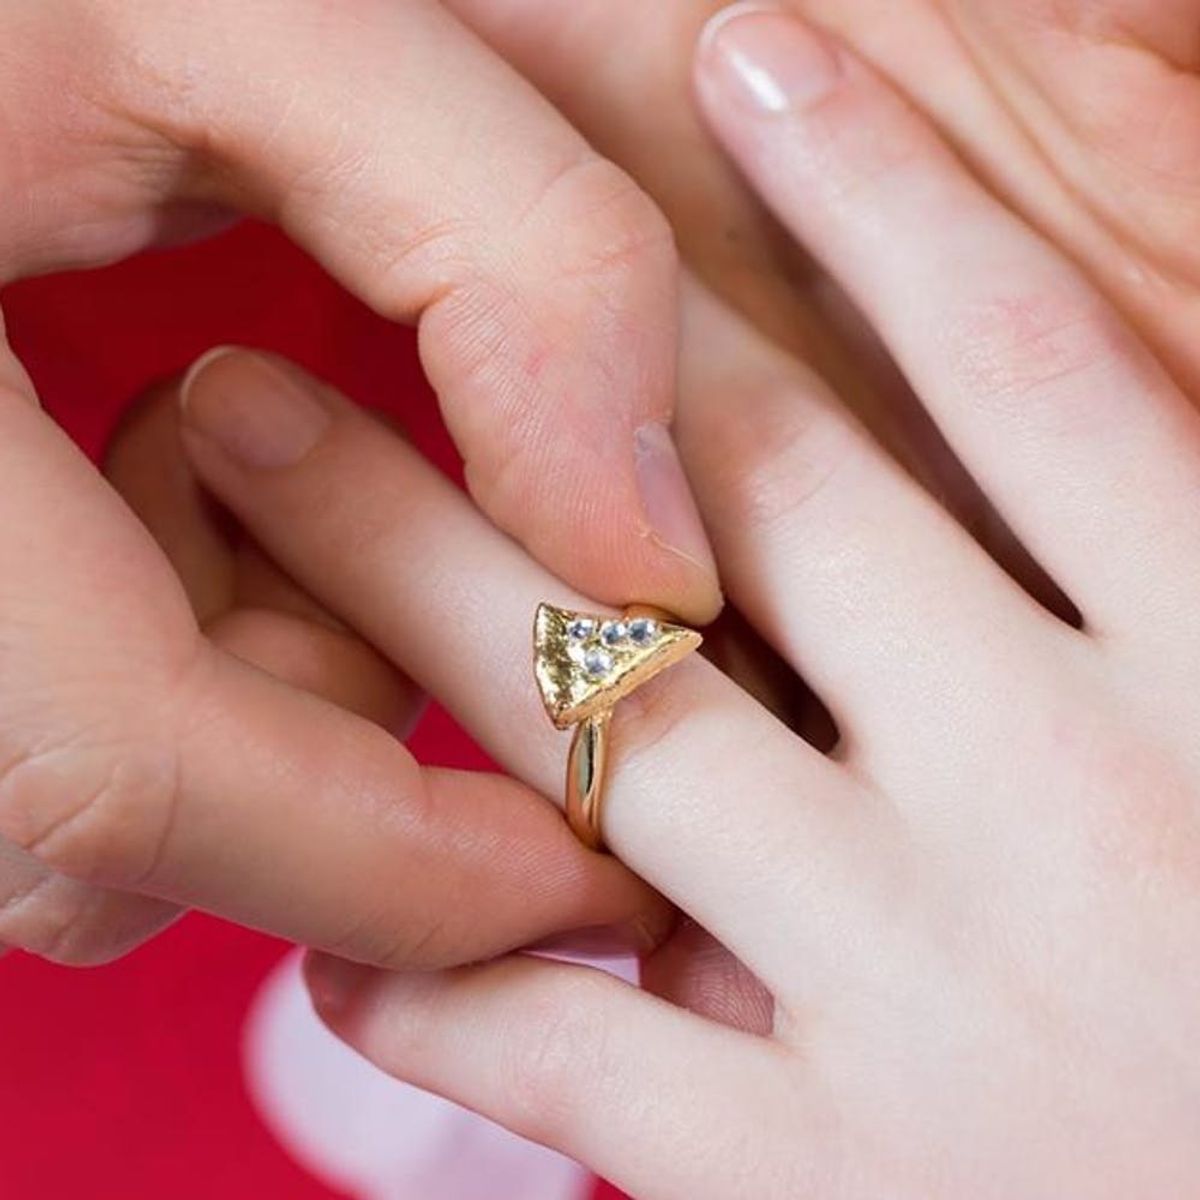 Here’s How to Win a Pizza-Shaped Gold and Diamond Engagement Ring from Domino’s